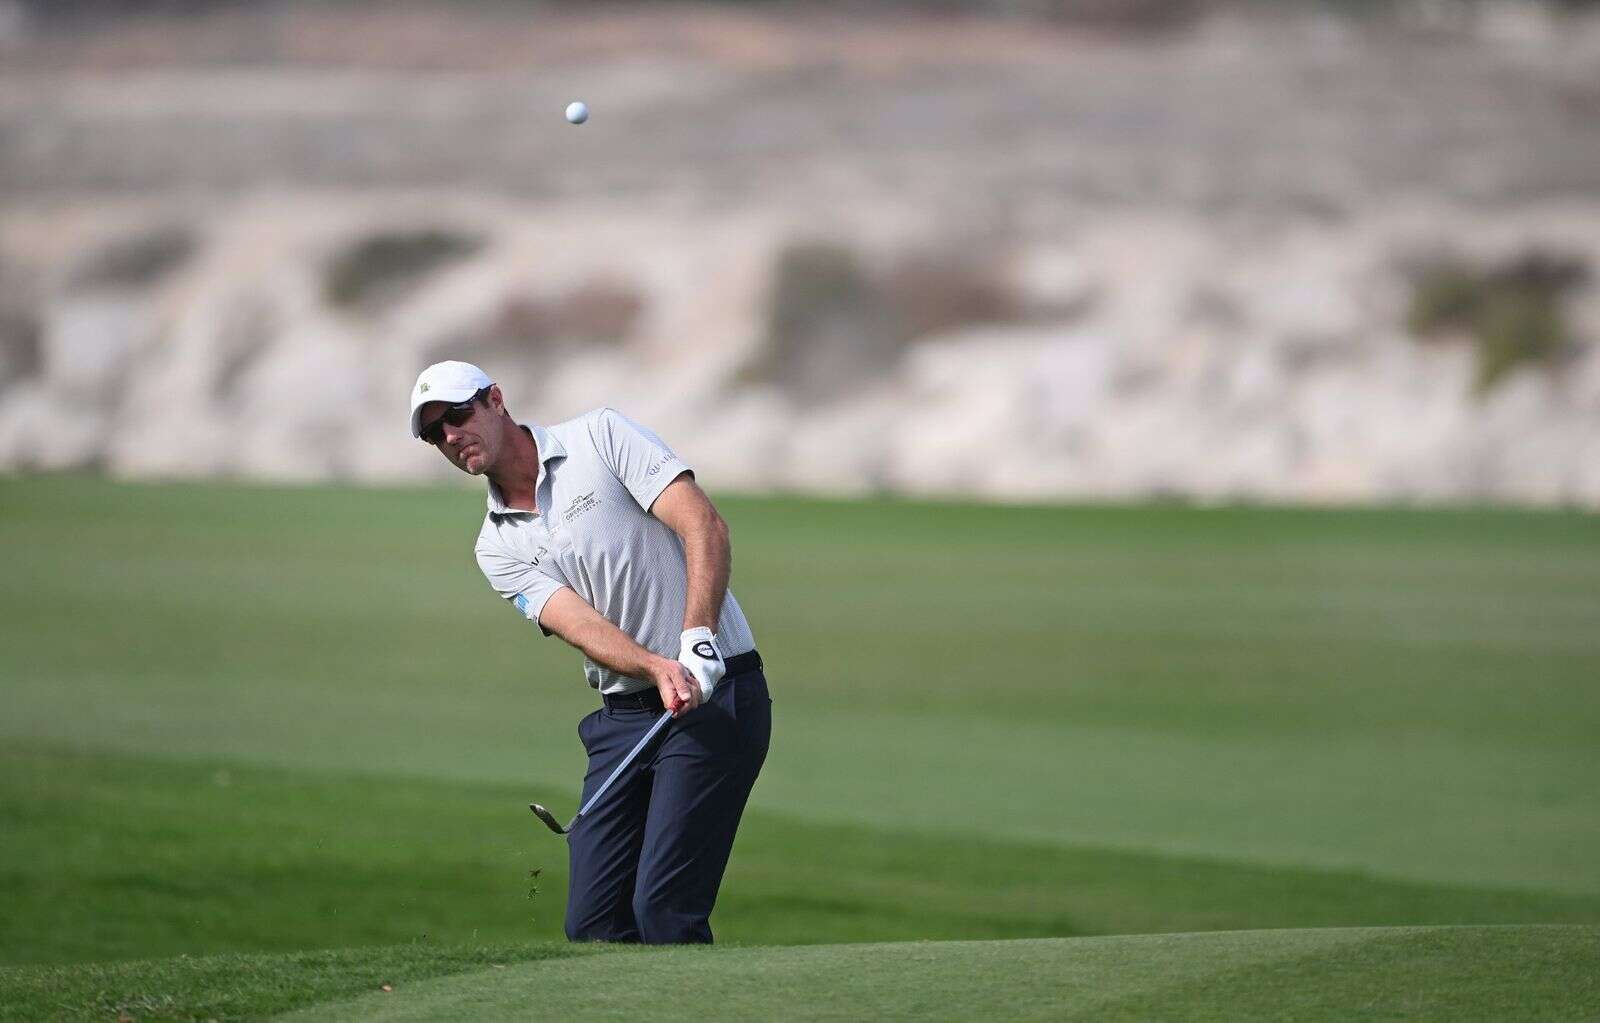 despite recent storms abu dhabi challenge set to kick-start back-to-back challenge tour events in the uae